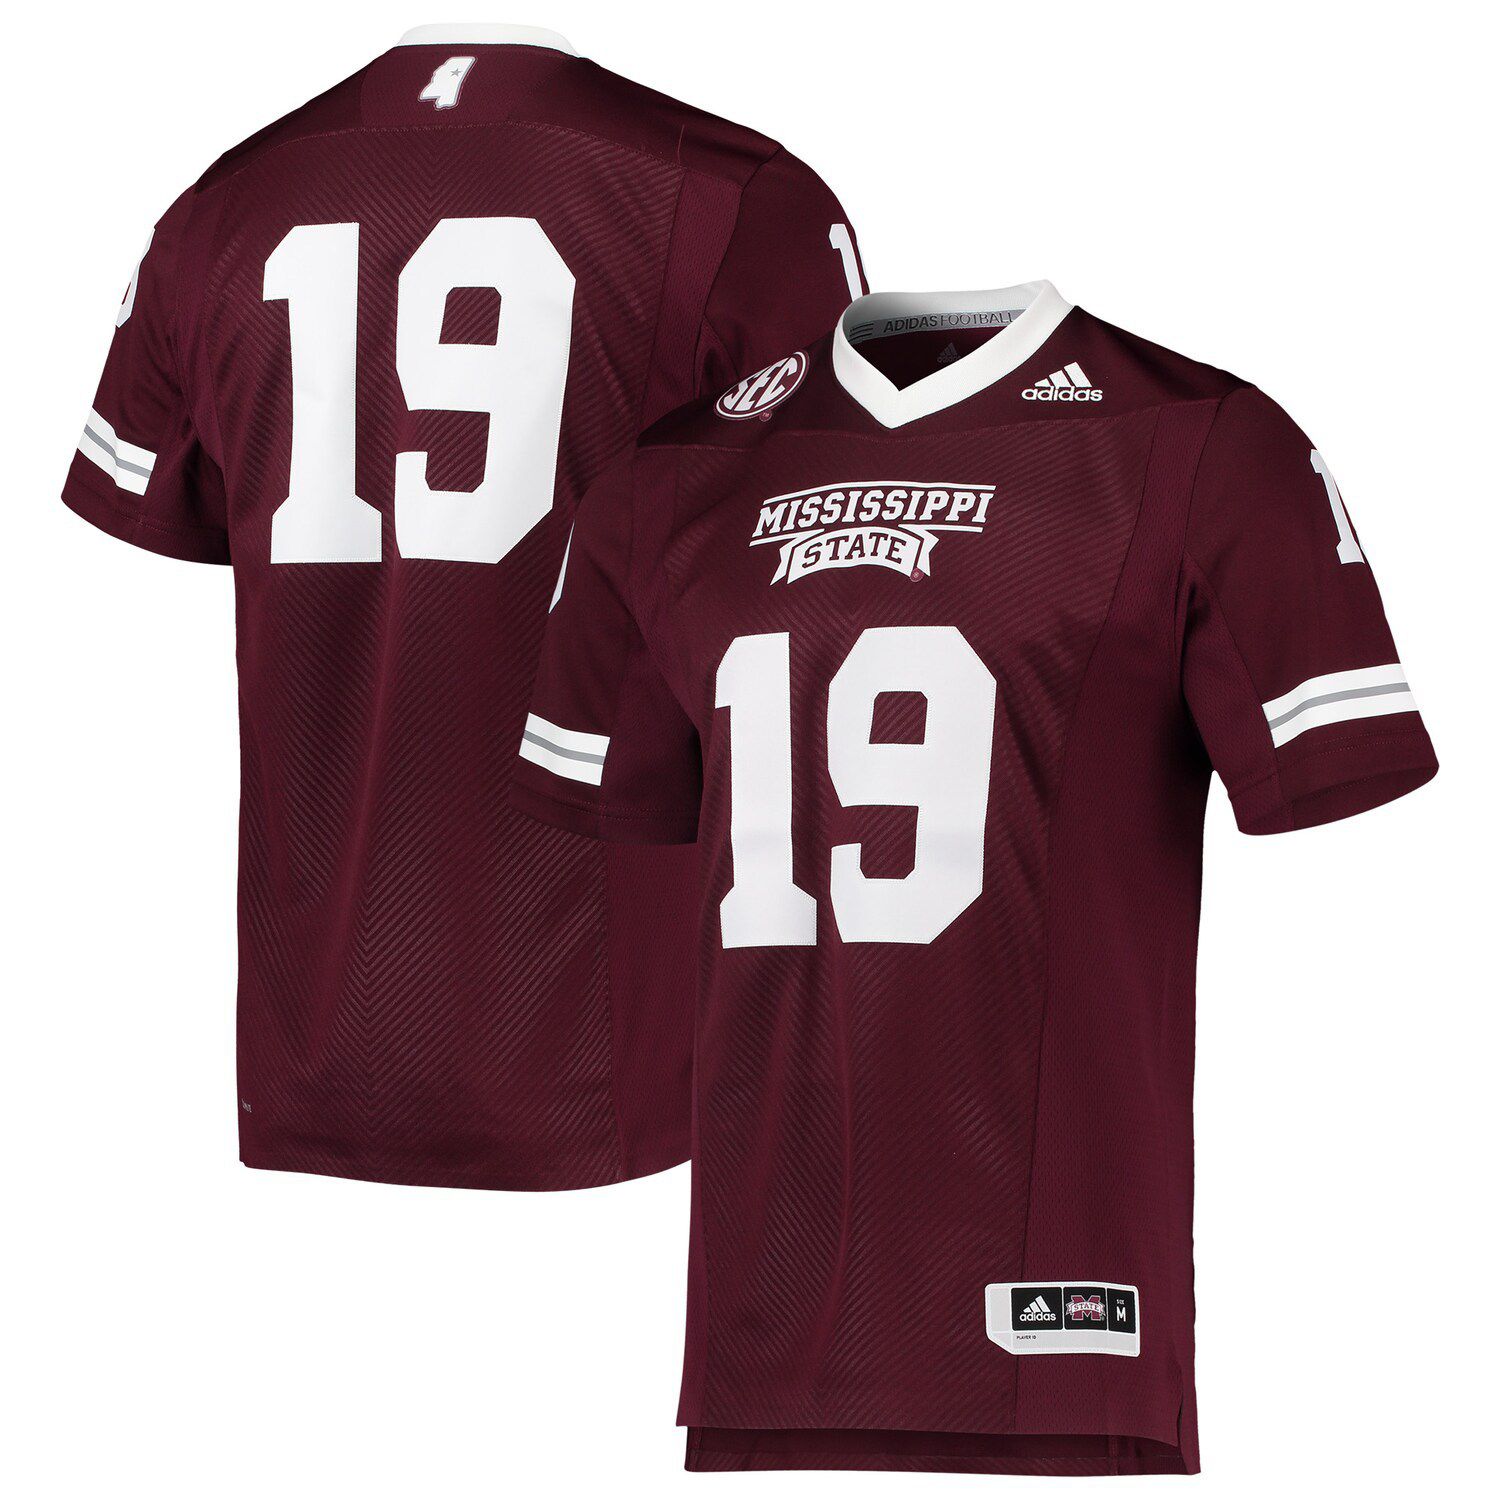 mississippi state football jersey